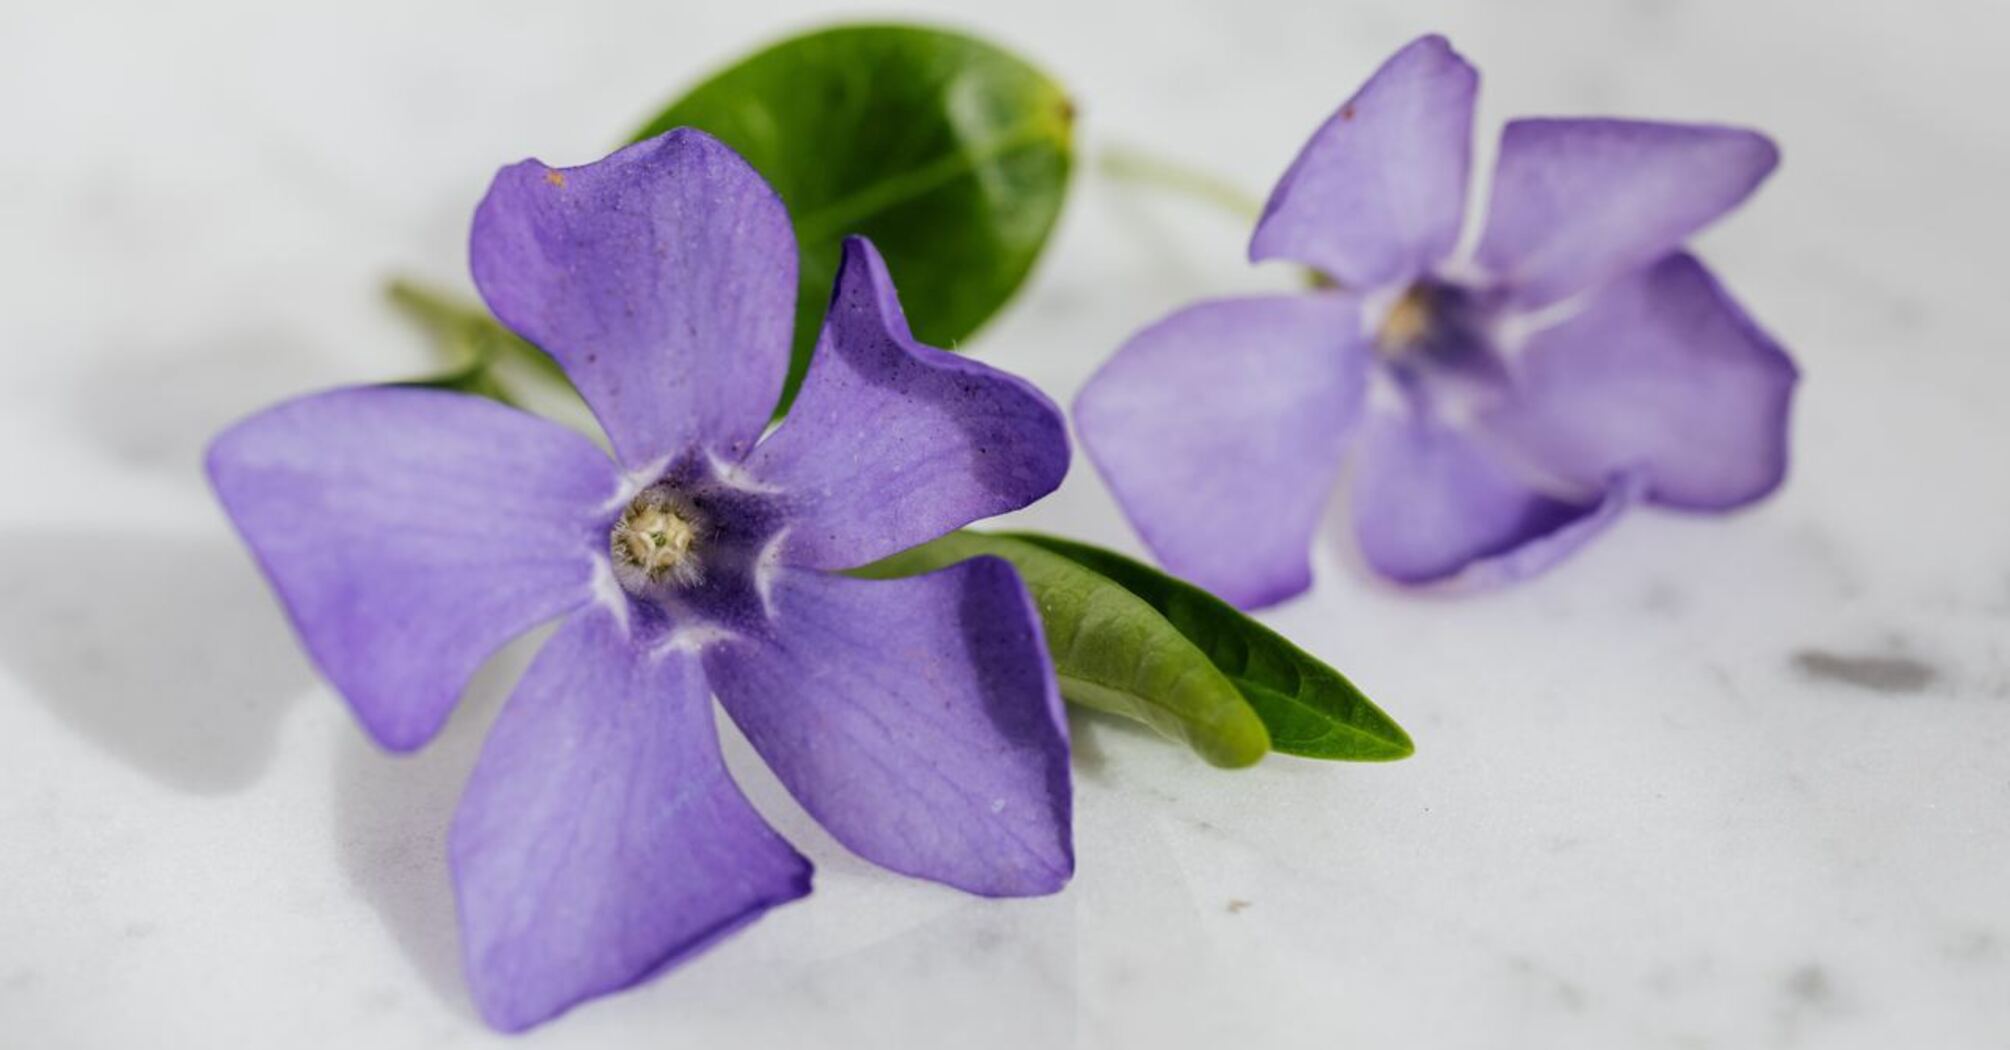 Superstitions associated with violets